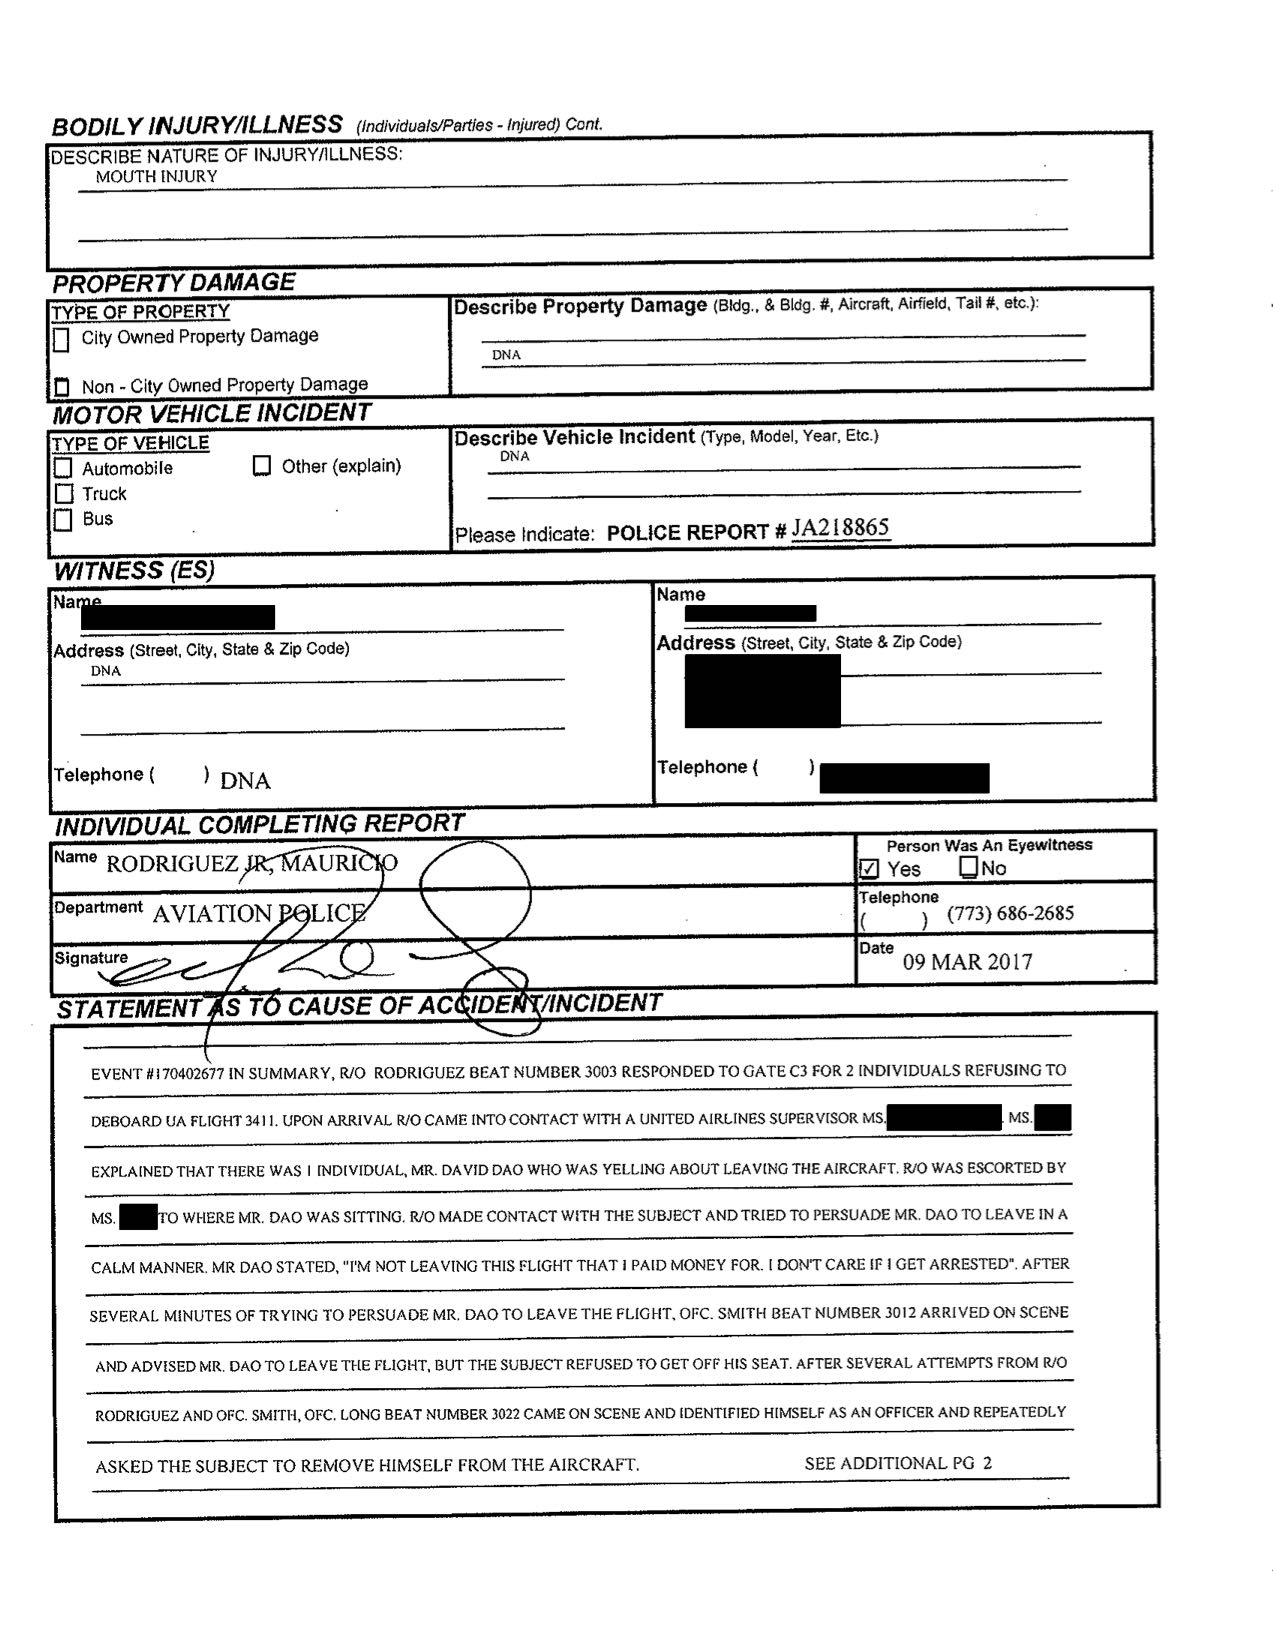 Chicago-Aviation-Police-incident-report B